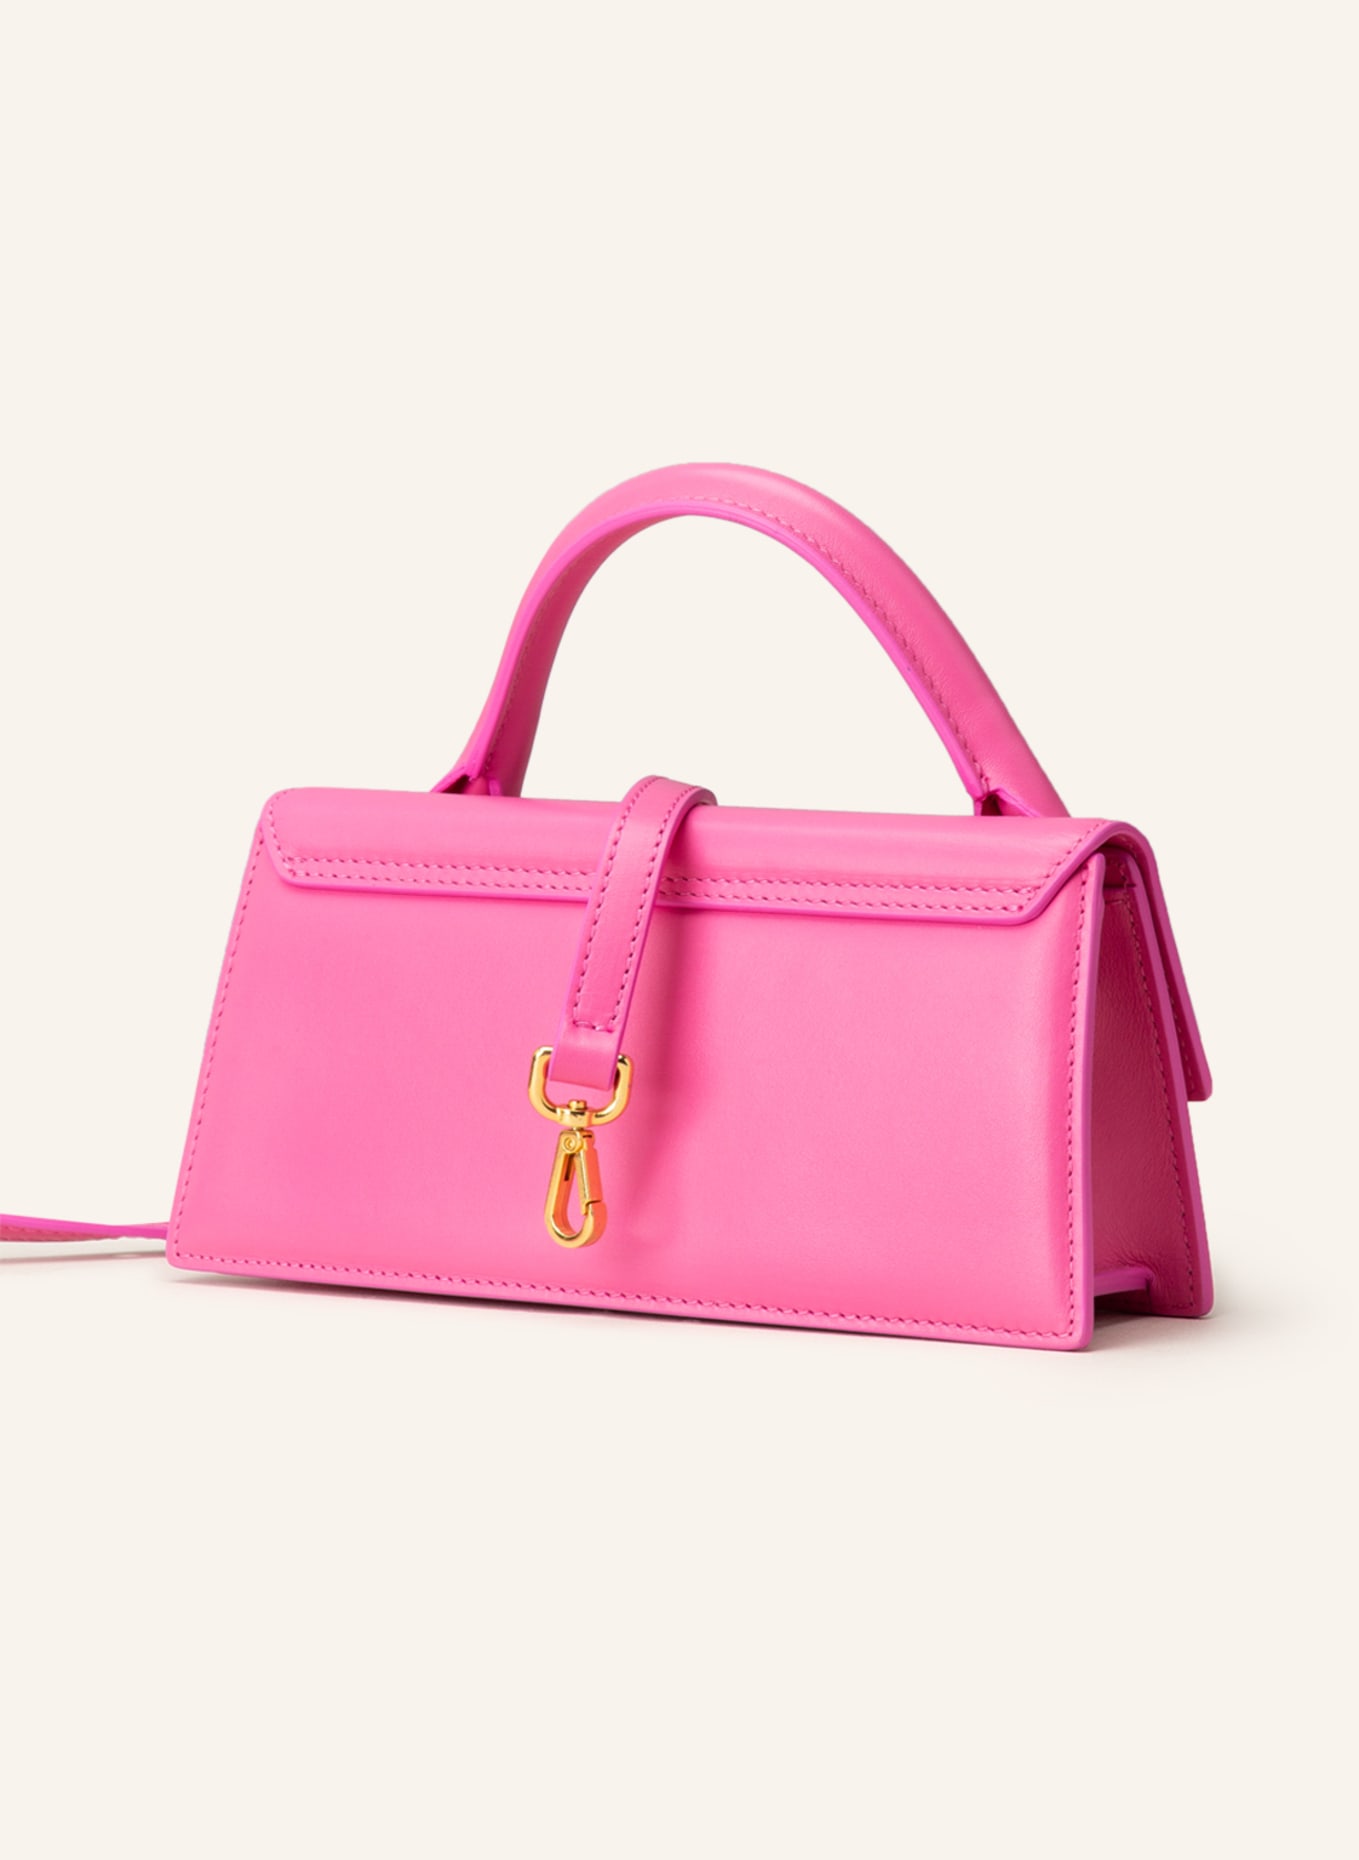 JACQUEMUS Handtasche LE CHIQUITO LONG , Farbe: PINK (Bild 2)